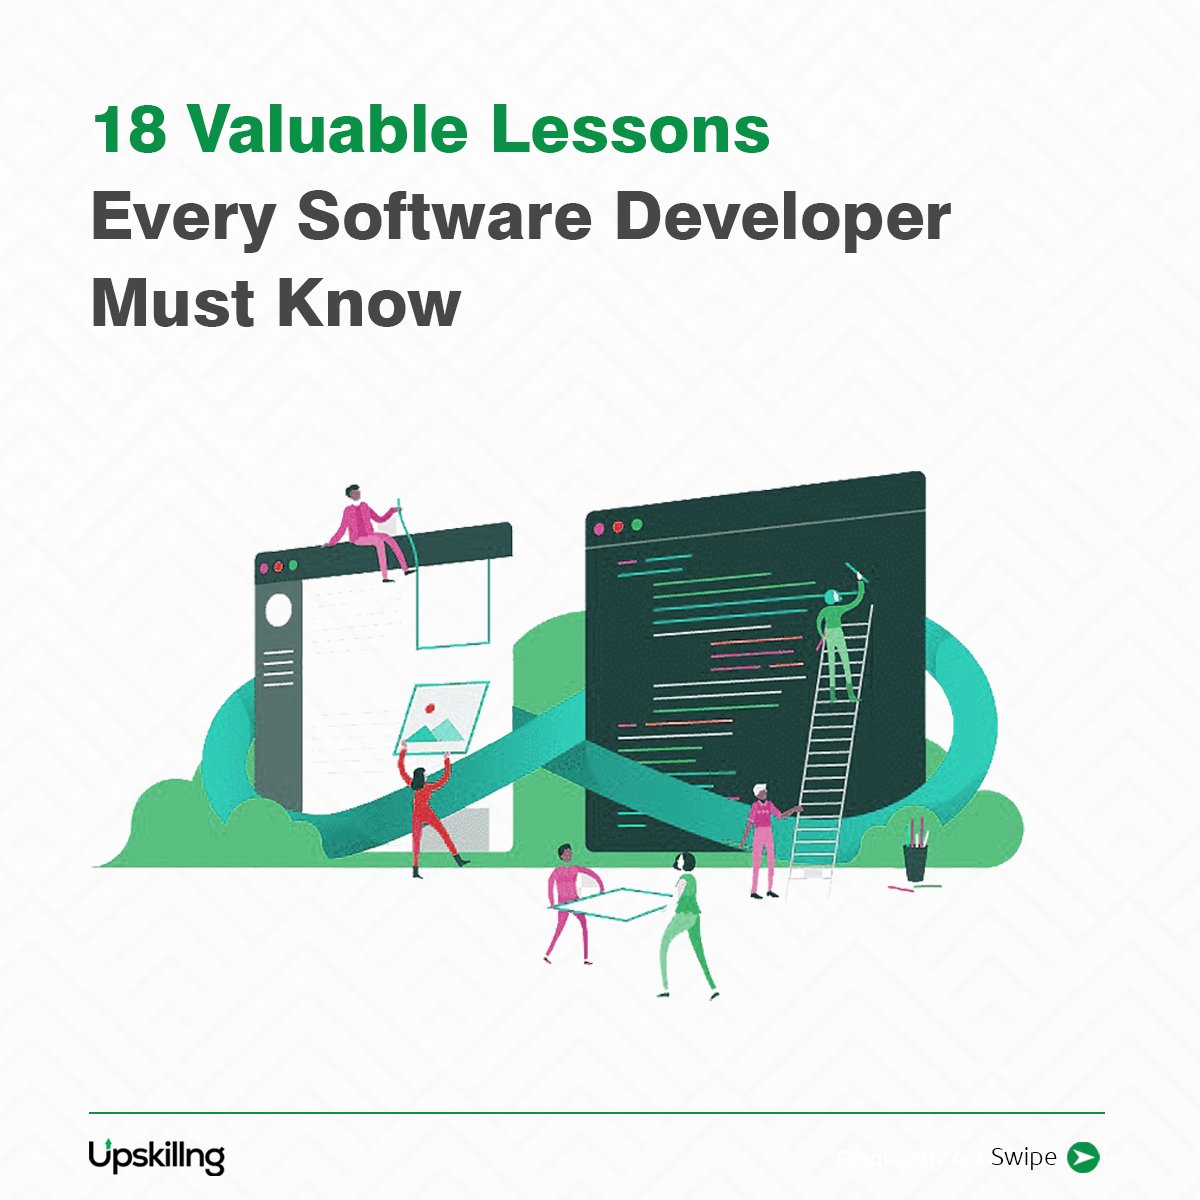 18 Valuable Lessons Every Software Developer Must Know(A Thread)We've spent some time talking to developers who have built amazing products and led teams successfully.If you're a new  #developer, these valuable lessons will help you accelerate your career.  #Upskillng